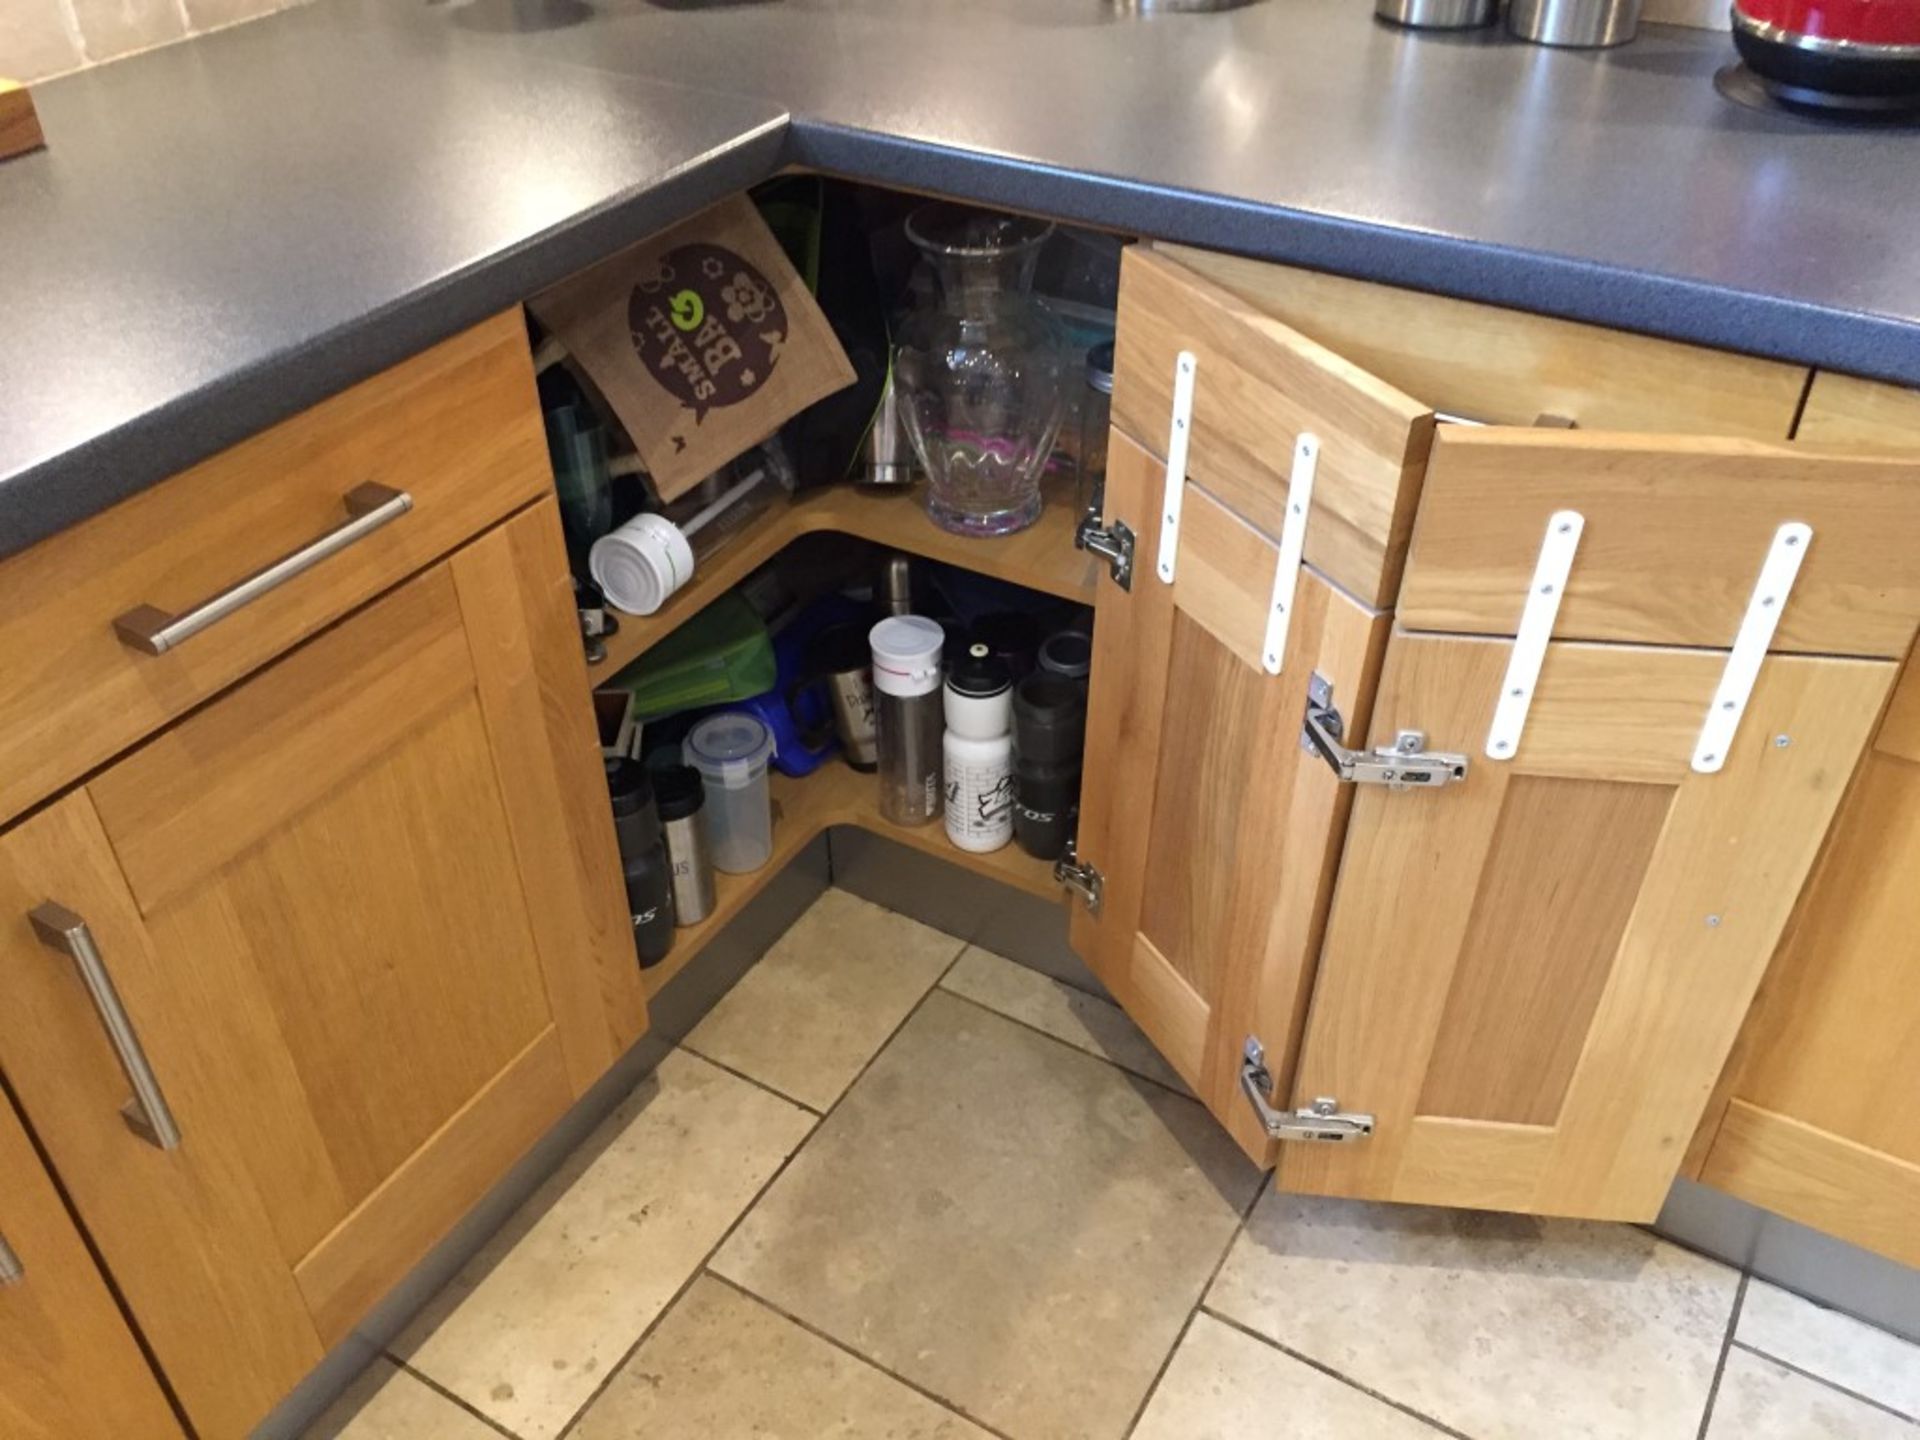 1 x Solid Wood Kitchen By English Rose With Breakfast Bar/Central Island Unit, Laminate Worktops And - Image 29 of 40